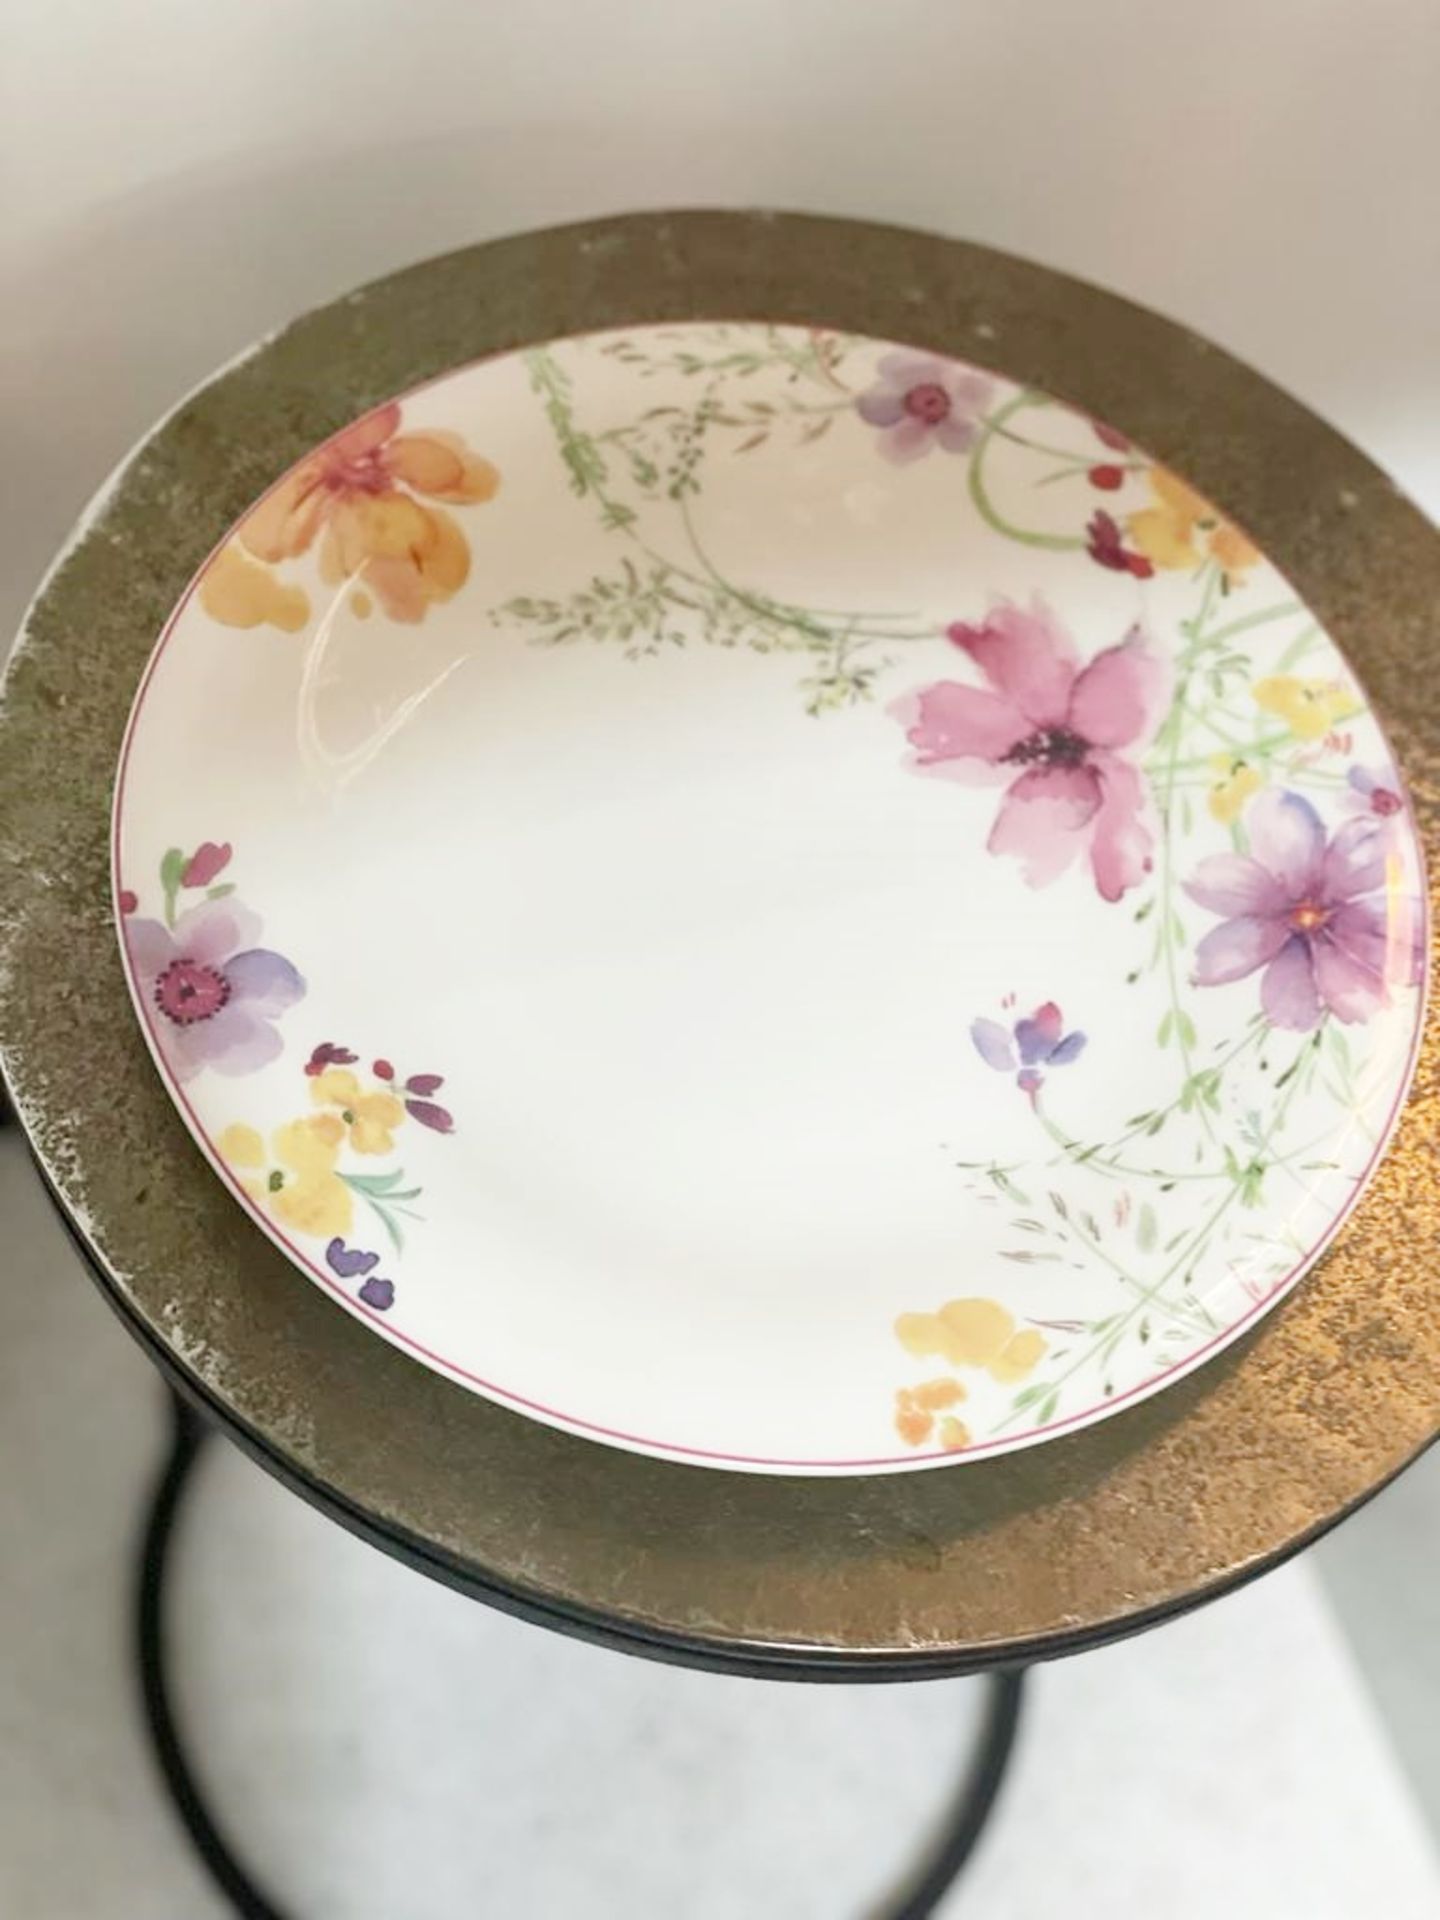 17 x Assorted Of Villeroy And Boch Floral Plates - Ref: AUR157  - NO VAT ON THE HAMMER - CL652 - - Image 3 of 5